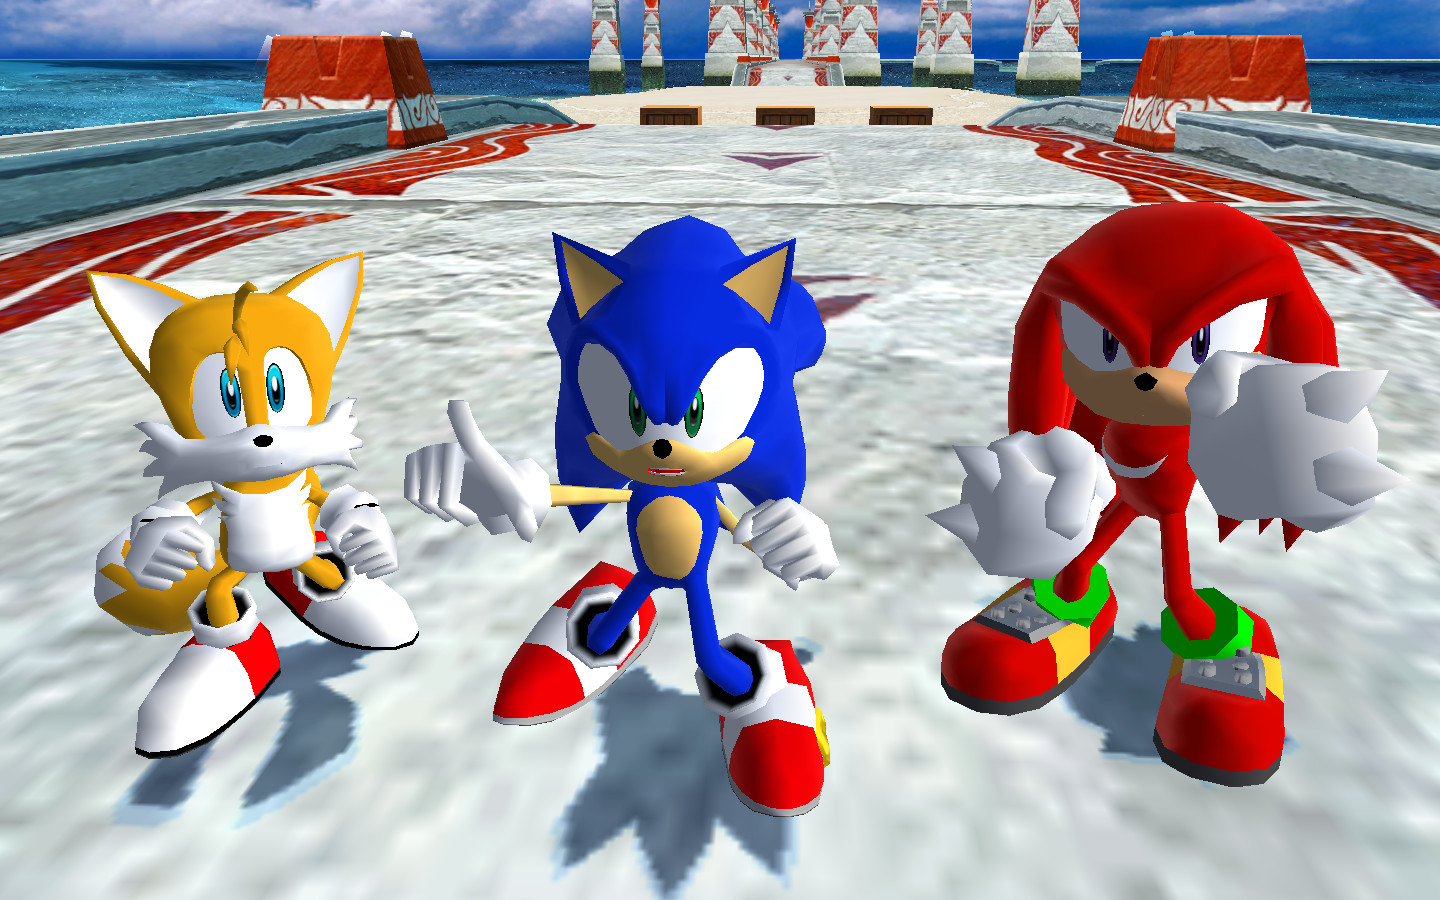 download game sonic heroes for android